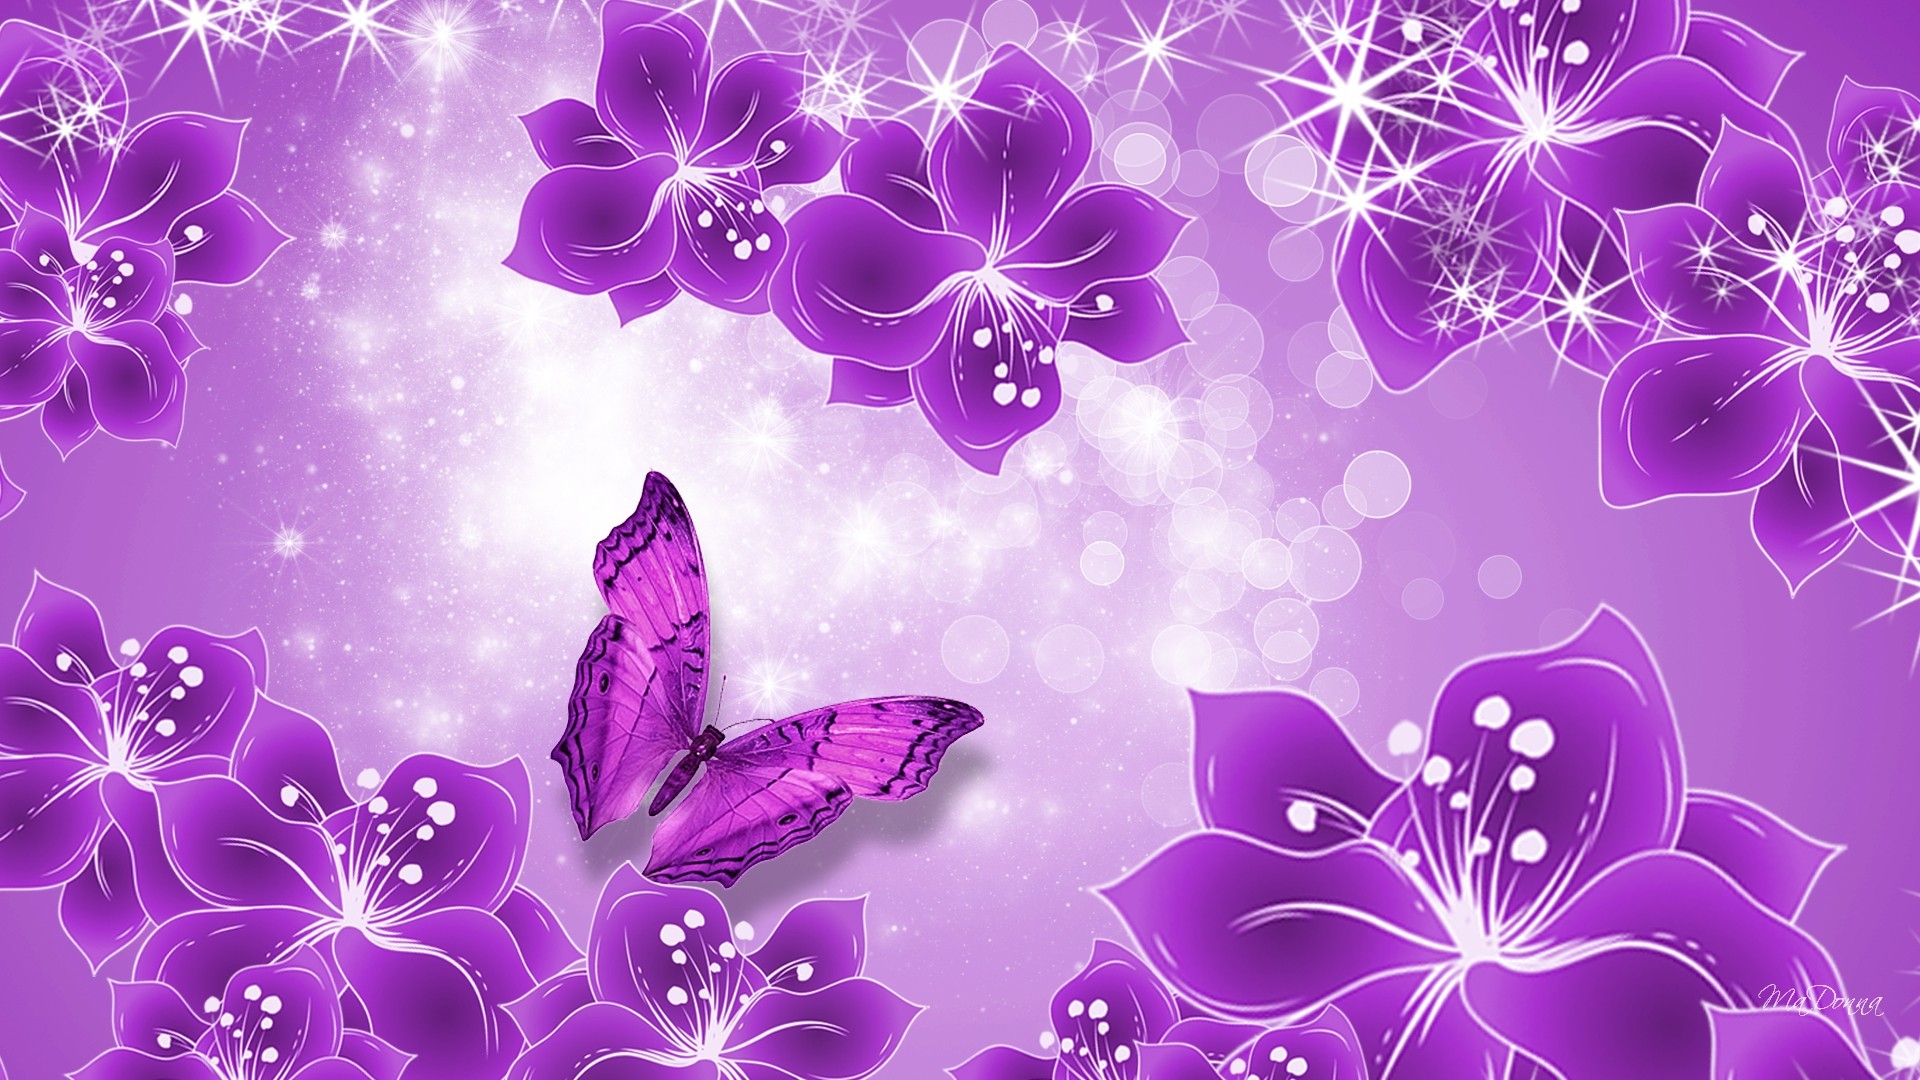 1920x1080 HD purple wallpaper image to use as background-14